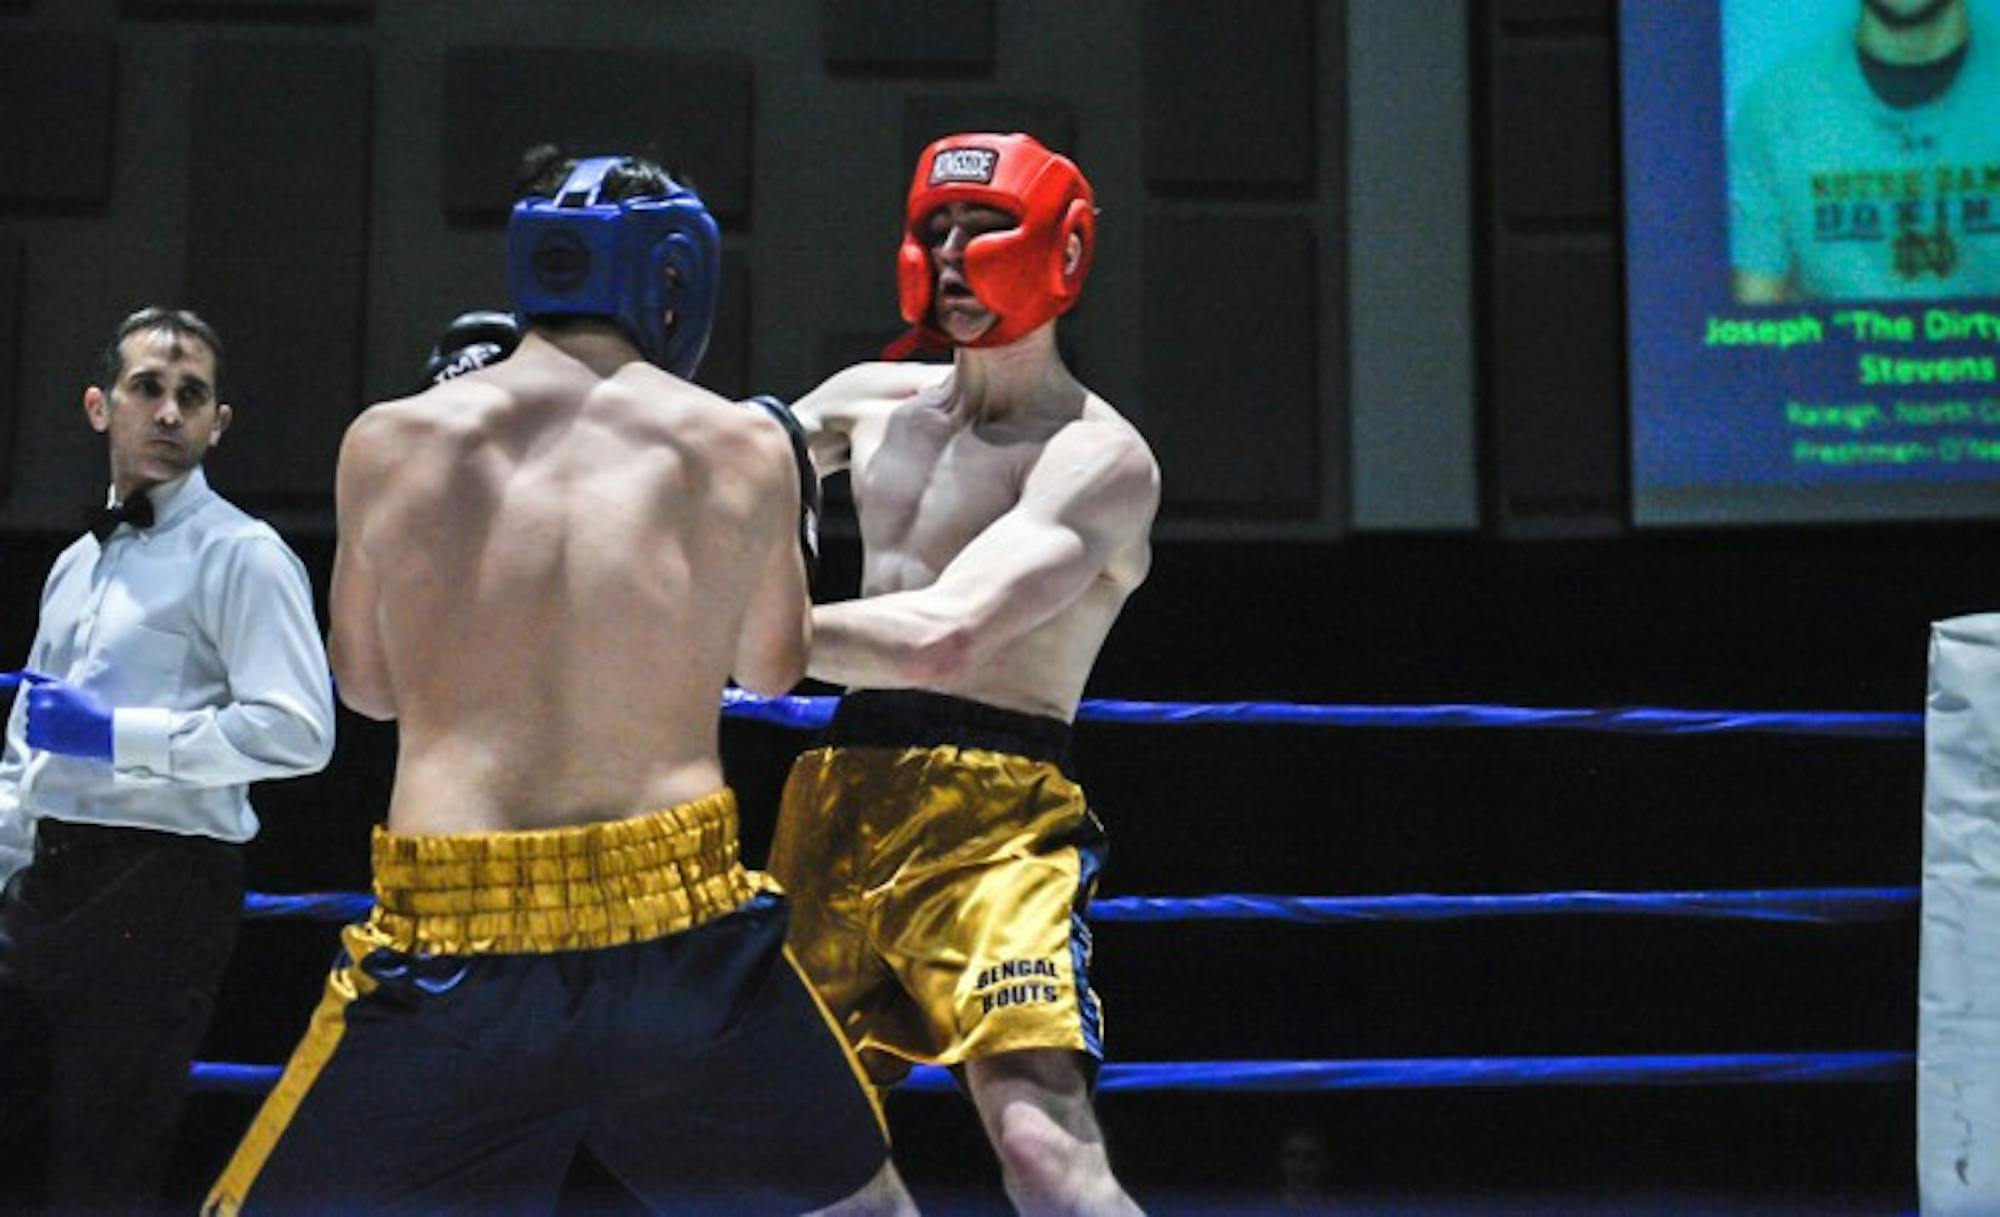 Senior captain and men's boxing president Jack Considine tangles with his opponent, Joseph Stevens, during the quarterfinal round of the 2015 Bengal Bouts on Feb. 18, 2015.